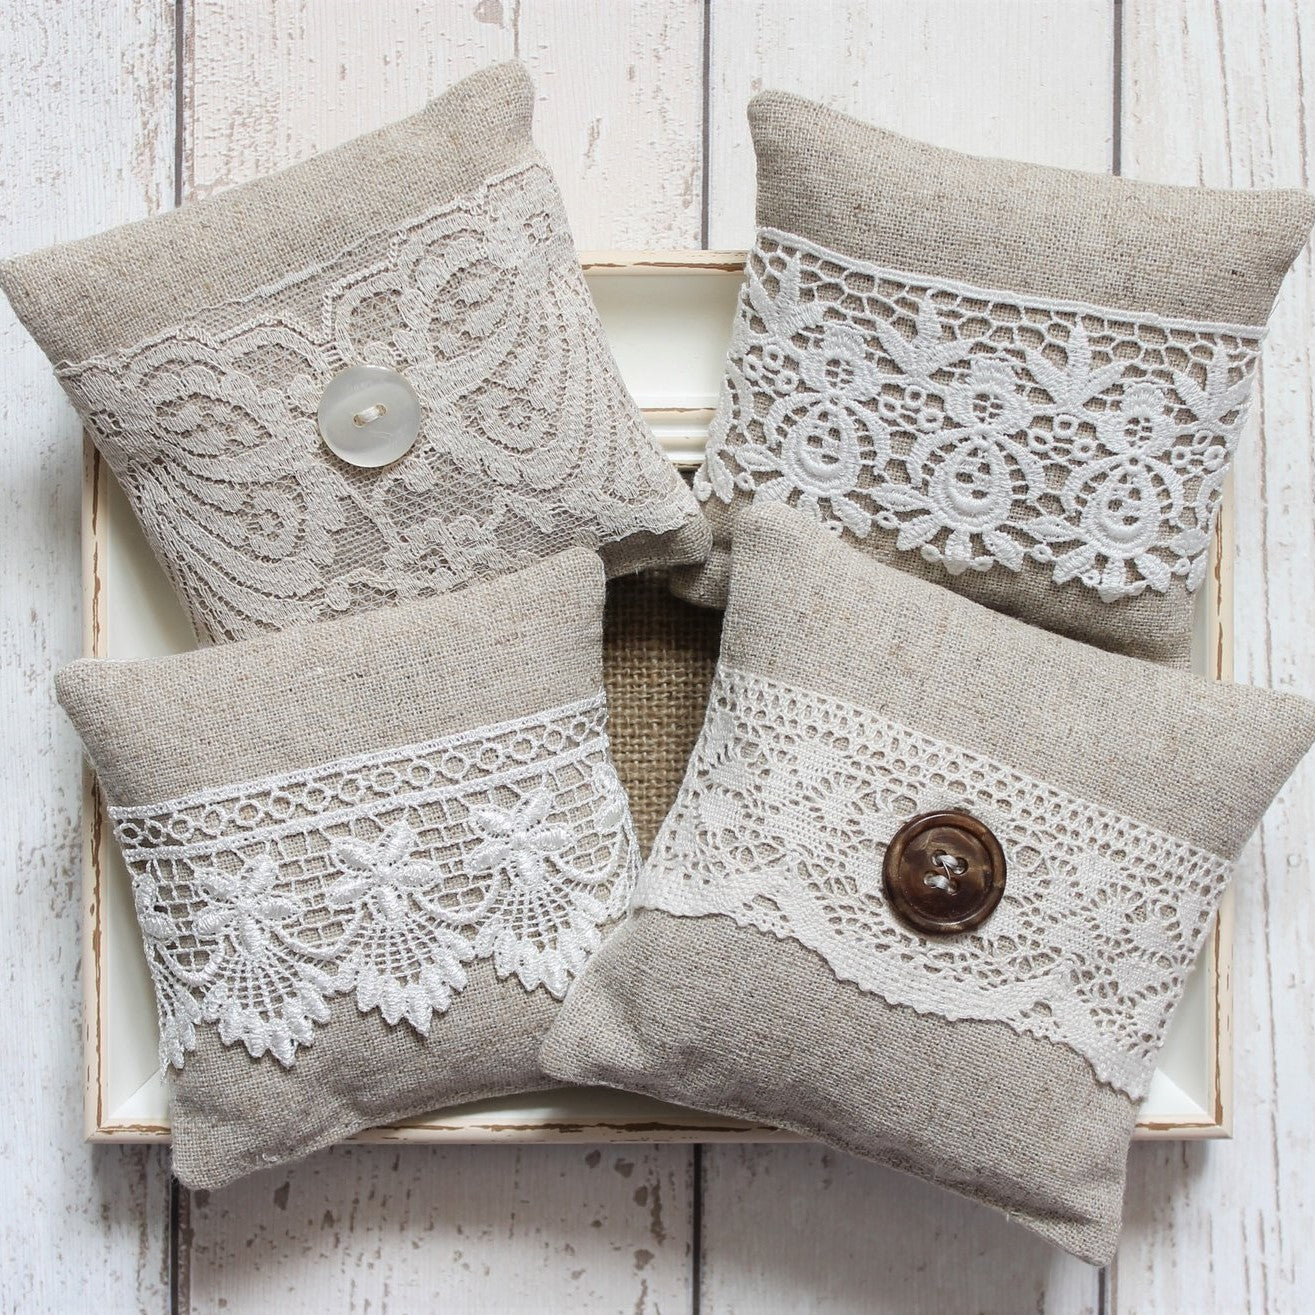 2 x Lavender Bags with Assorted Lace and Mother of Pearl Button Decoration